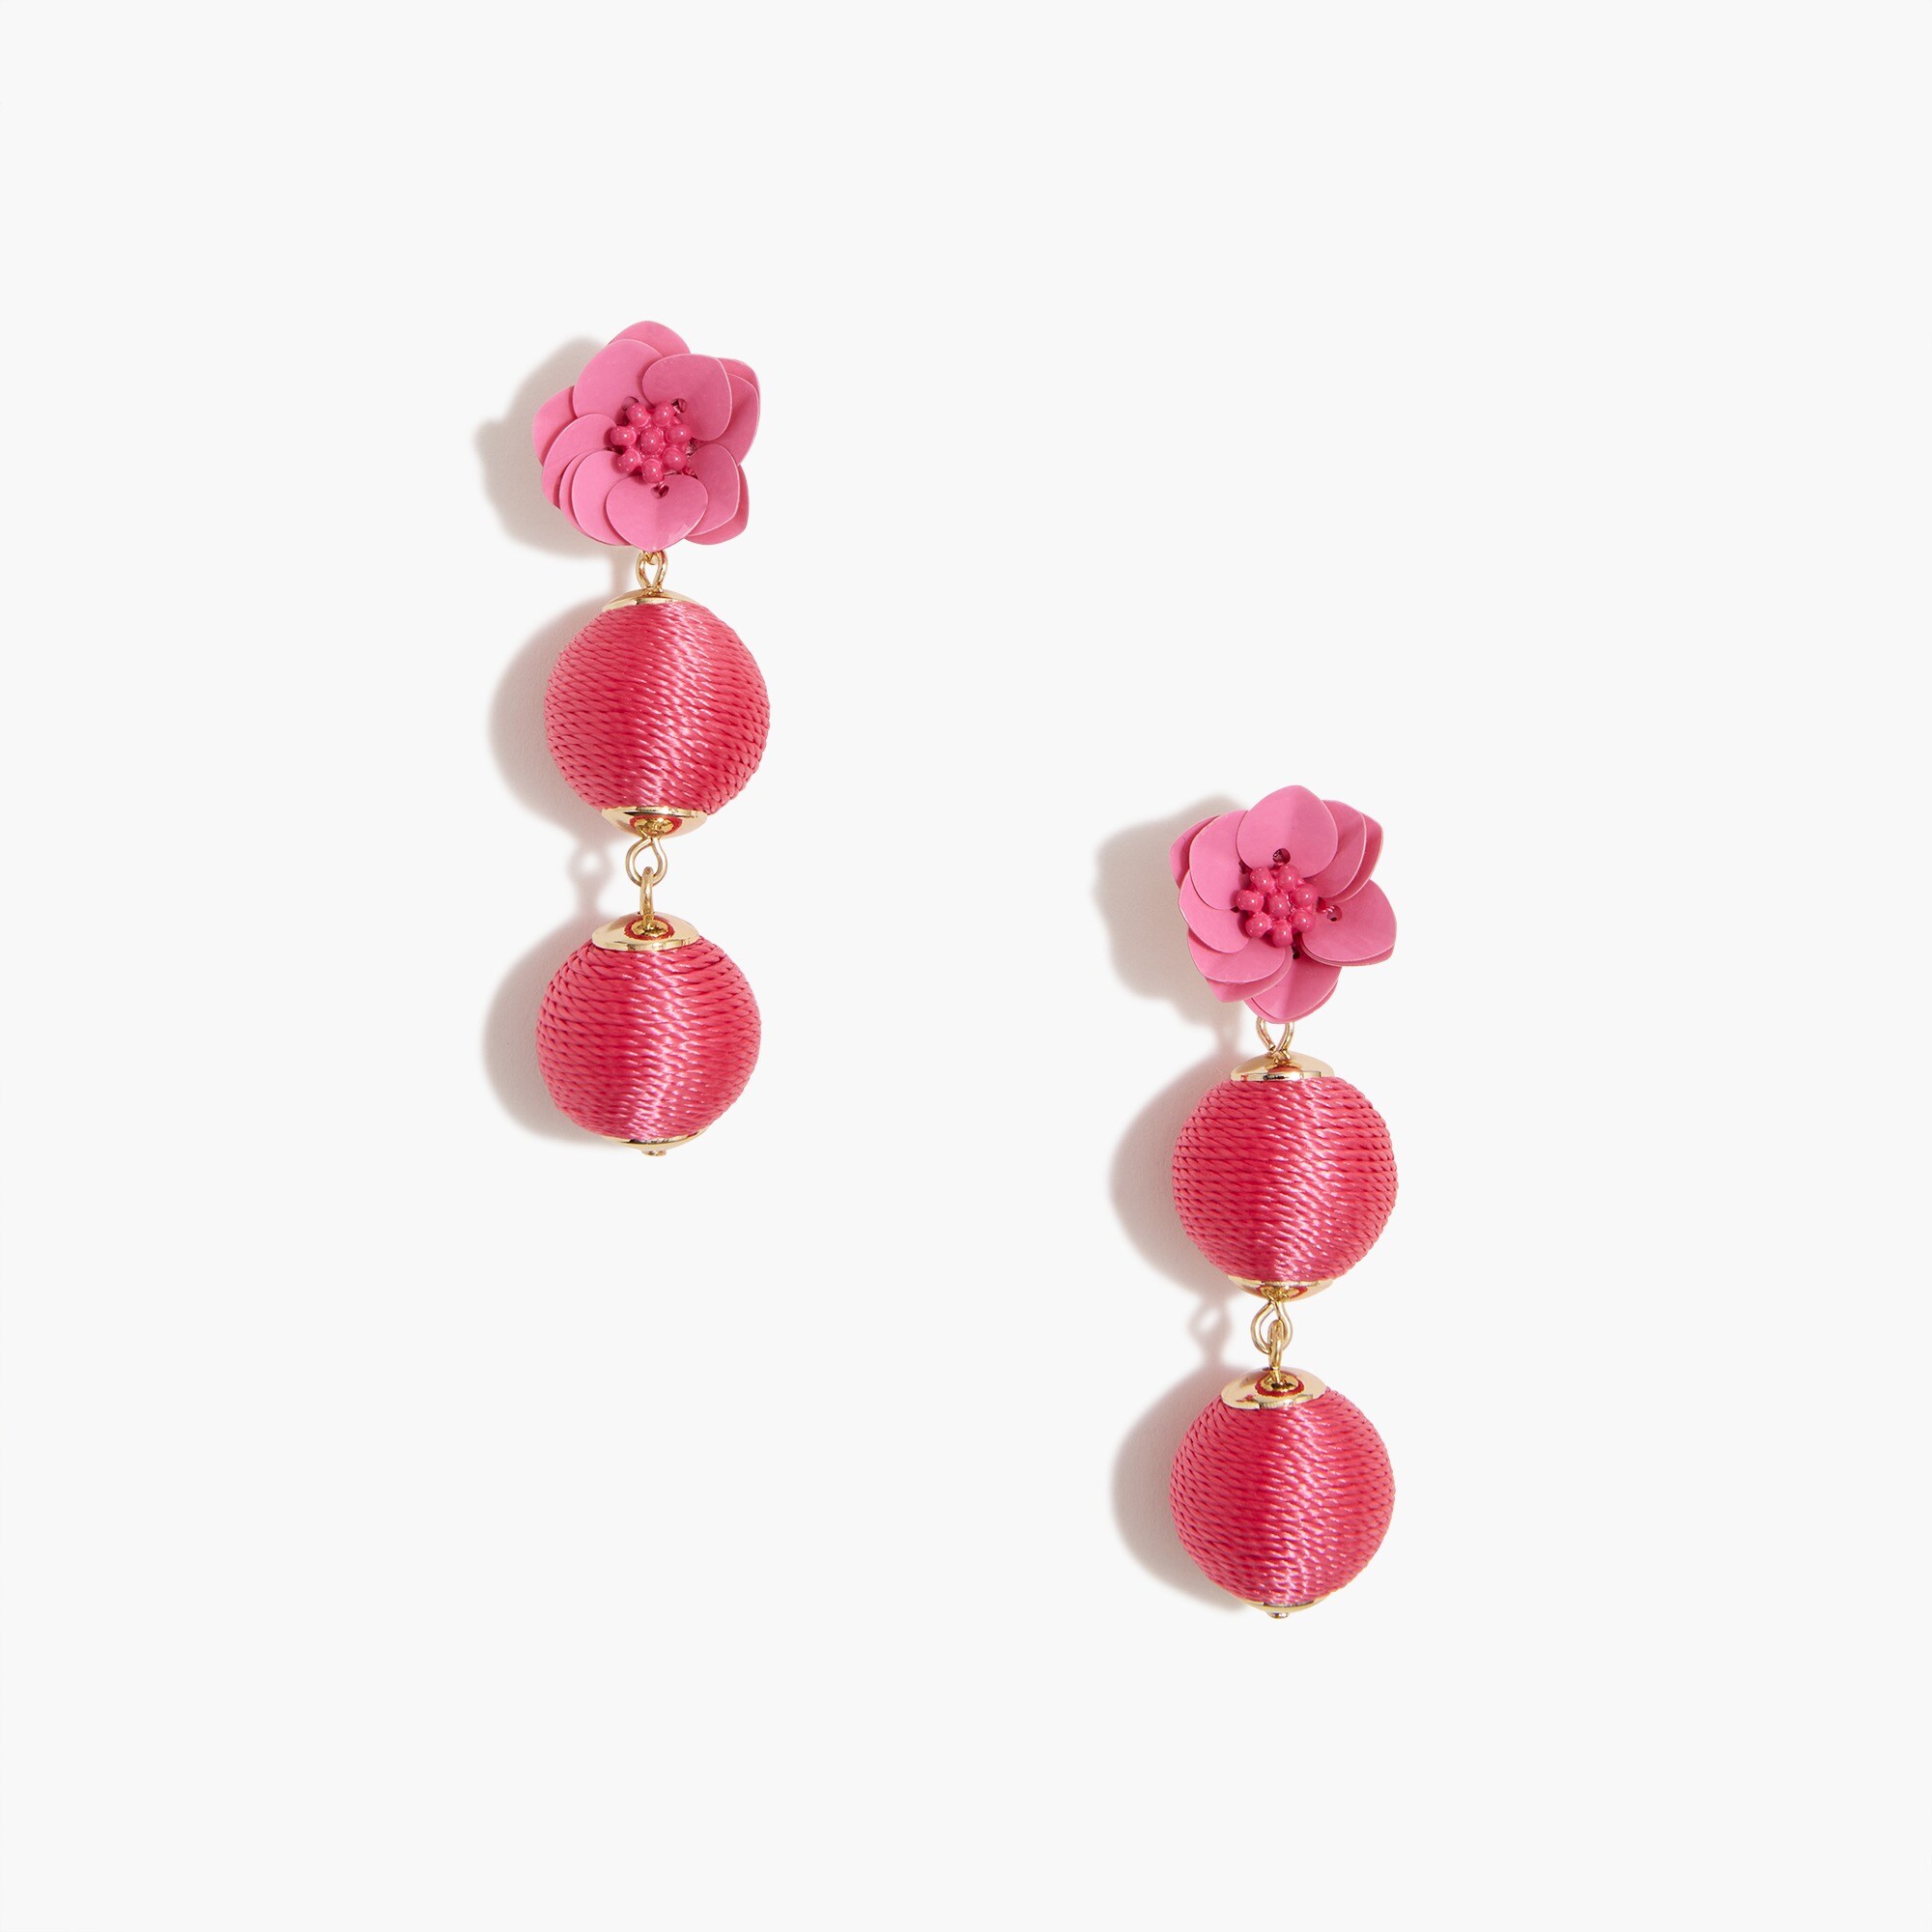  Wrapped floral earrings